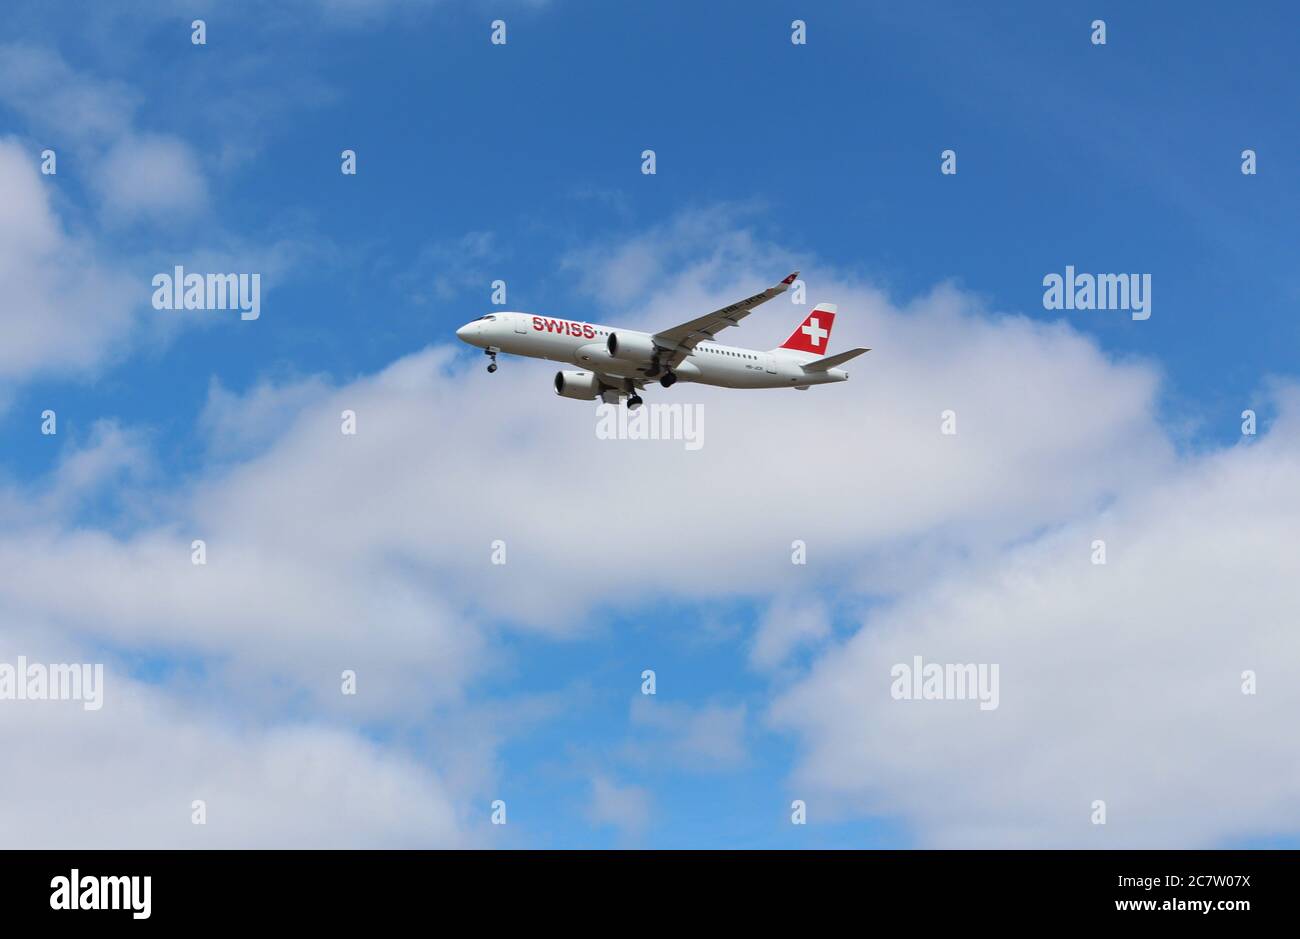 Hounslow, London - July 18th 2020: A Swiss, Airbus A220-300 Flight LX354 from Geneva (GVA) to London Heathrow (LHR), descends as it prepares to land. Stock Photo